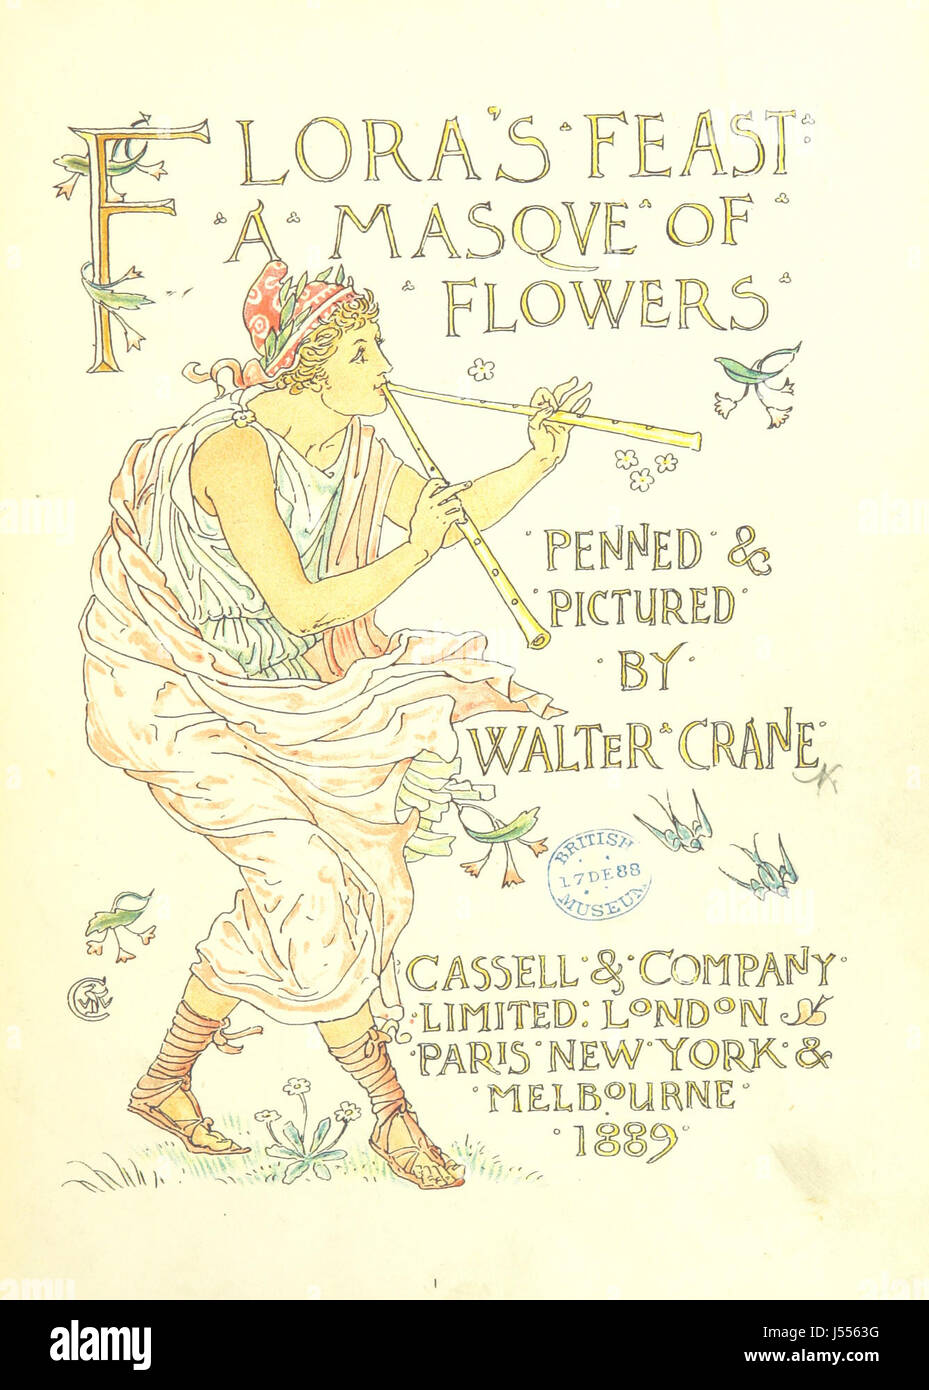 Flora's Feast. A masque of flowers, penned & pictured by Walter Crane Stock Photo